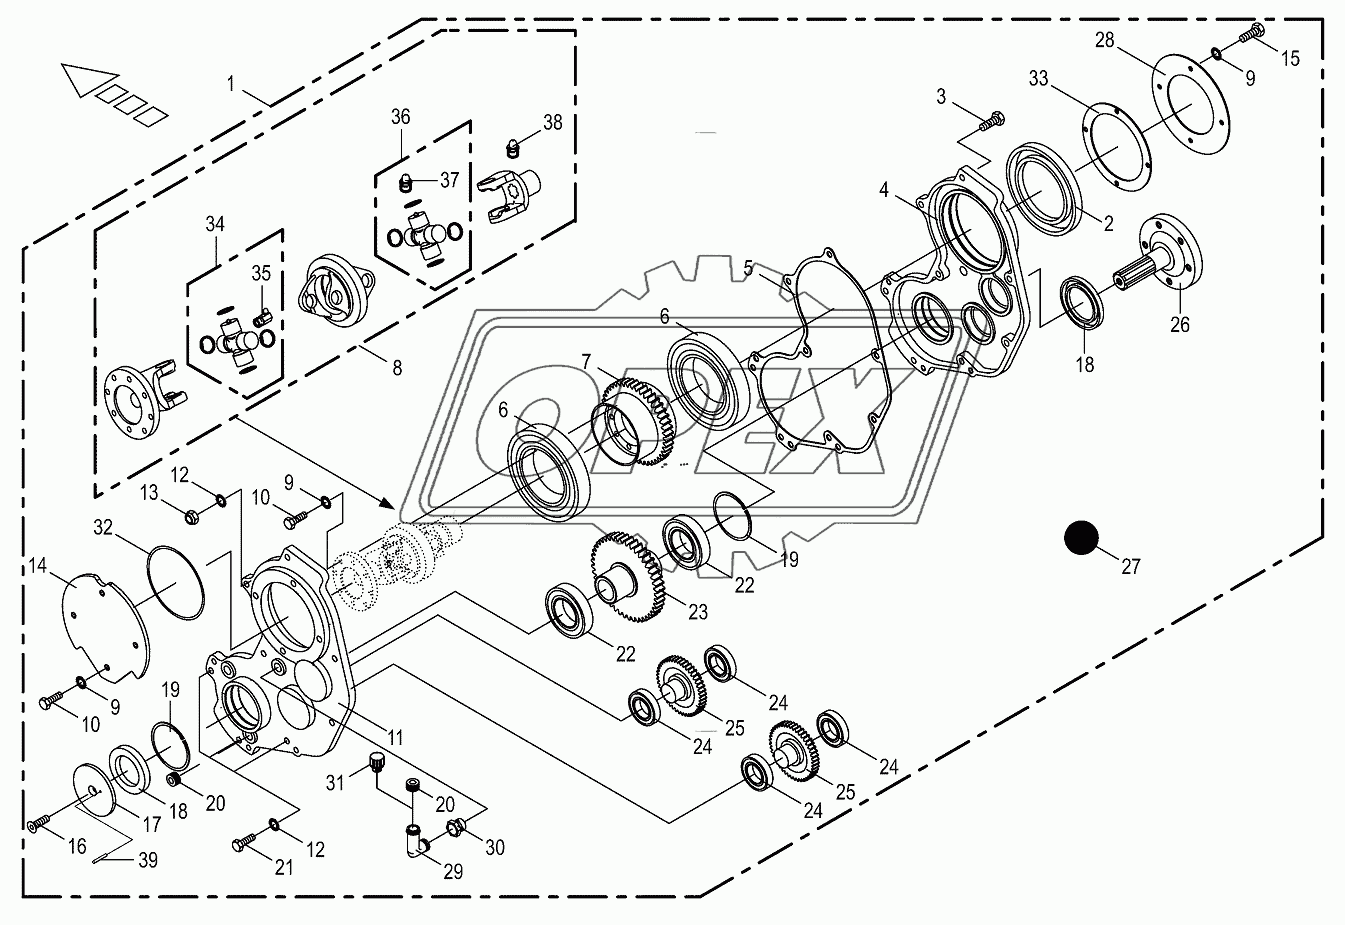 Gearbox-front/lateral